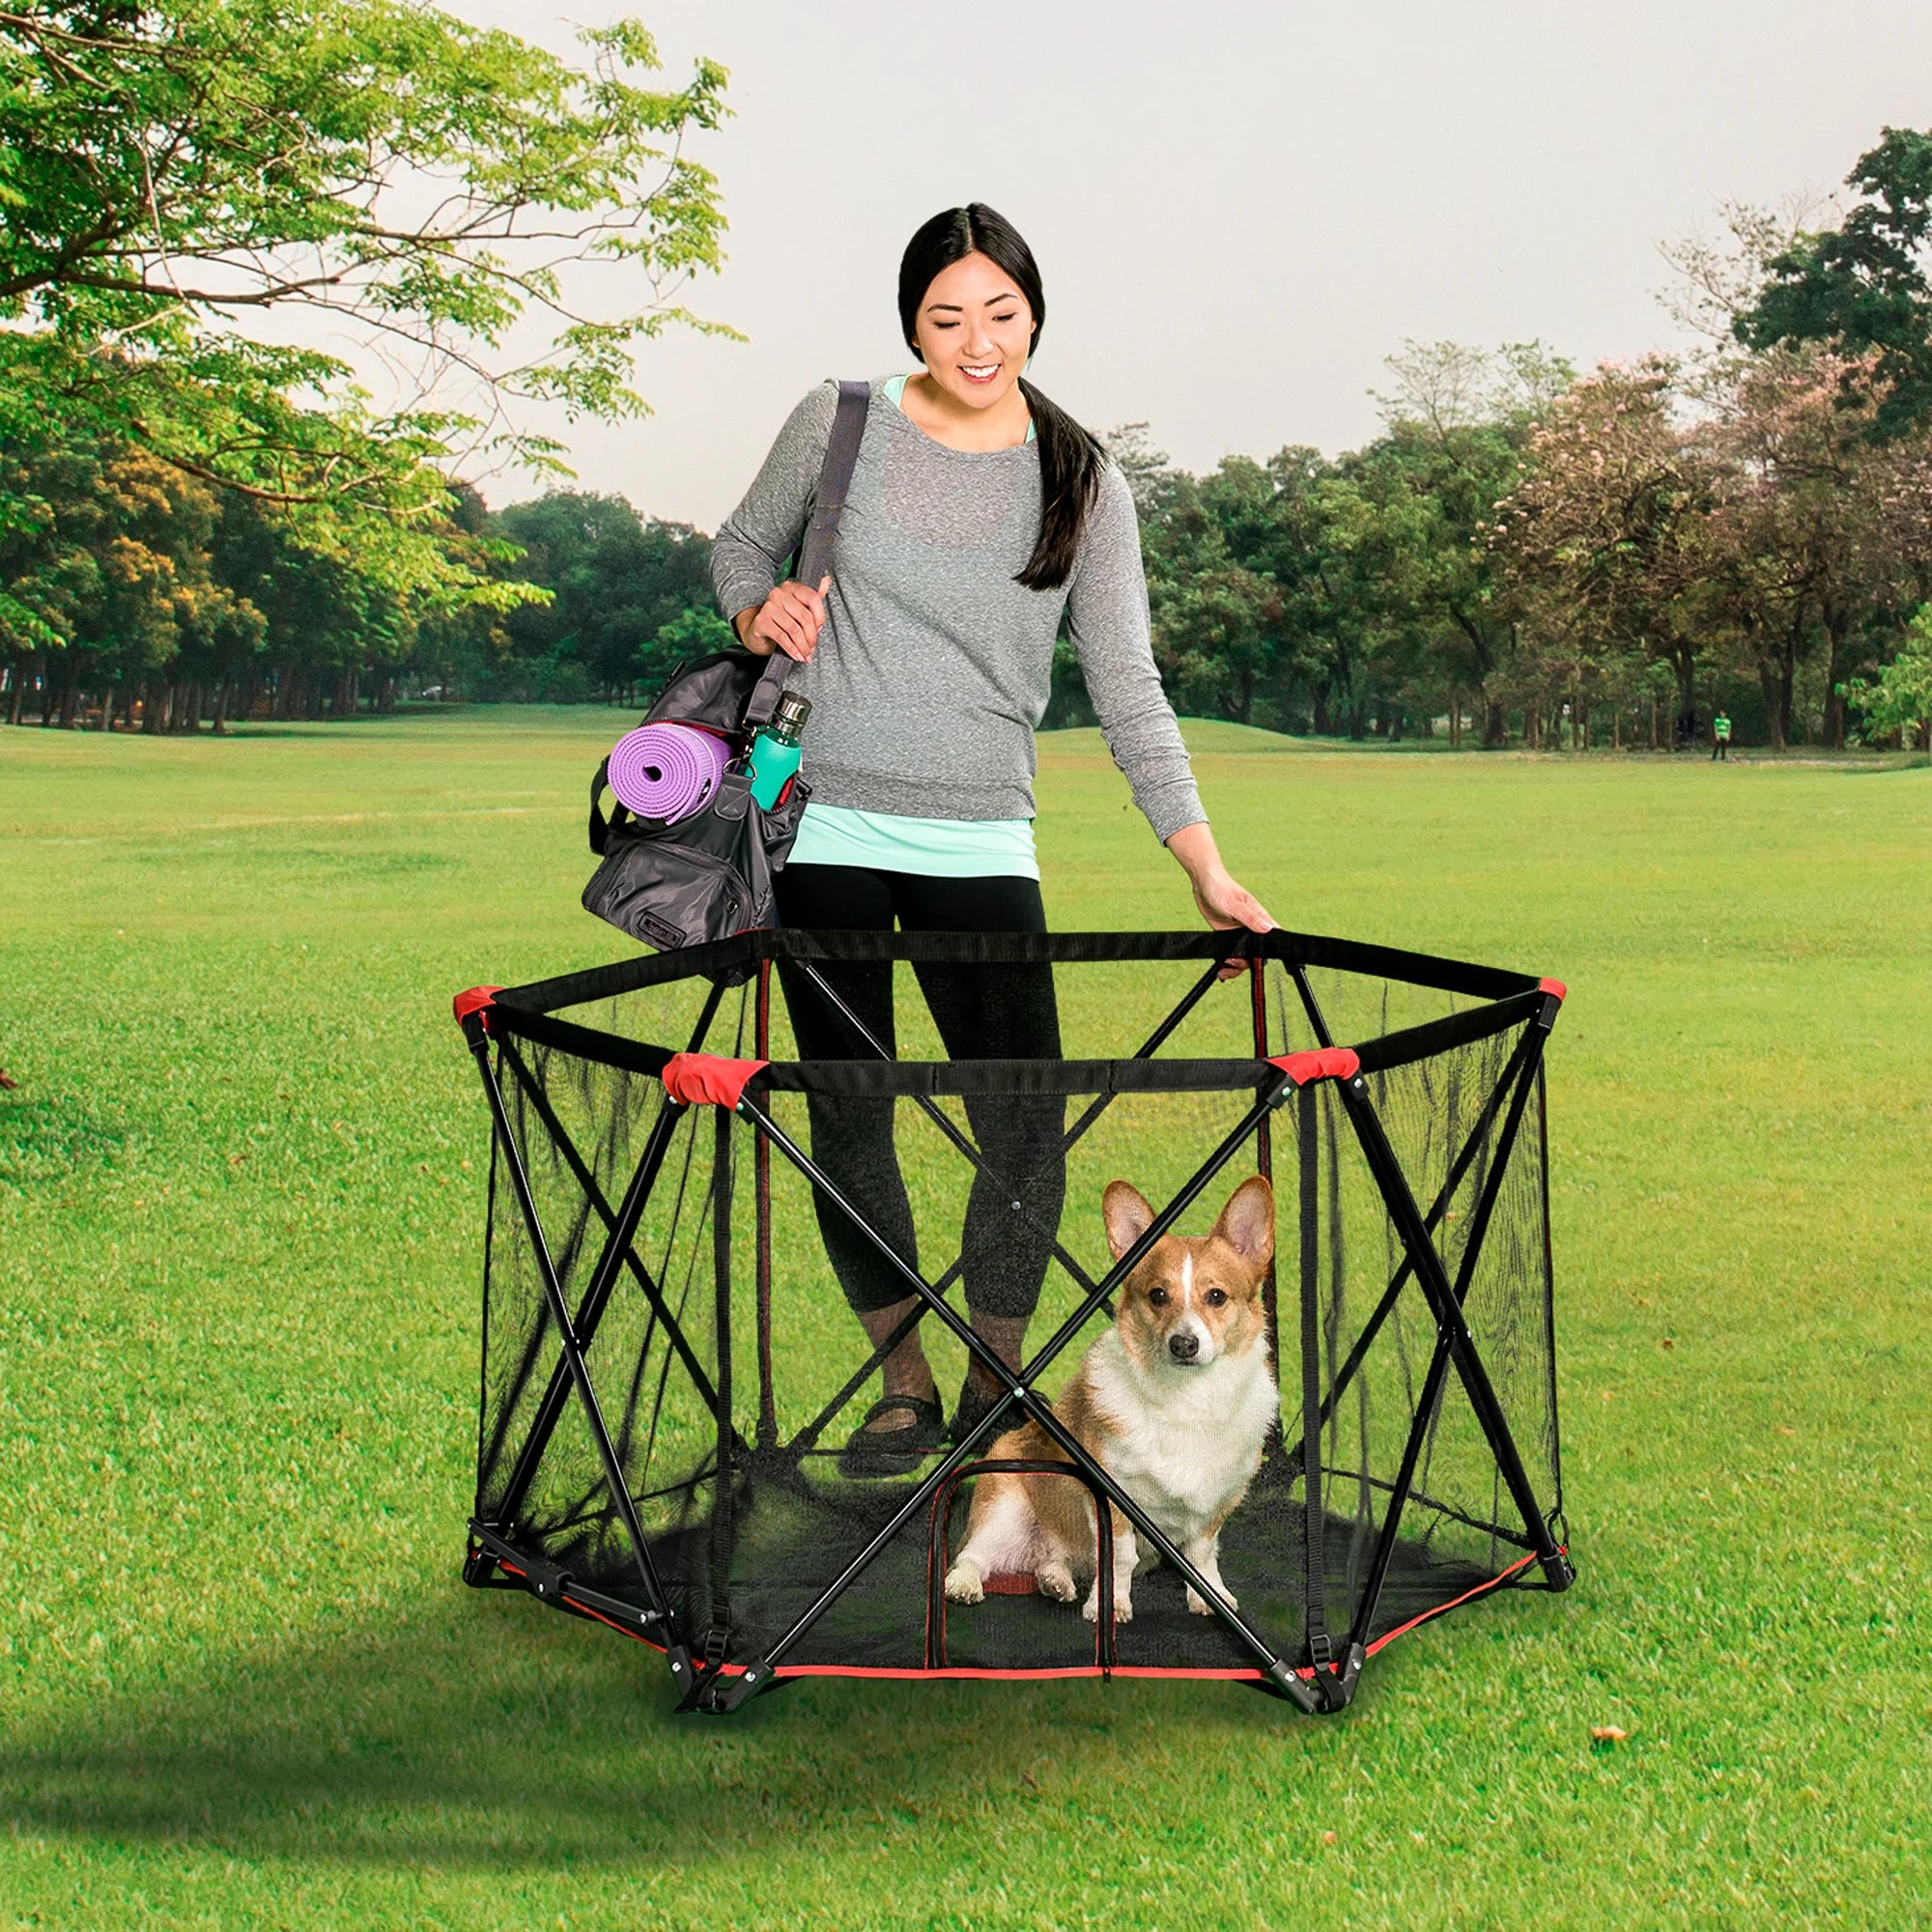 Woman at a park touching the Portable Pet Pen while looking down at her dog.